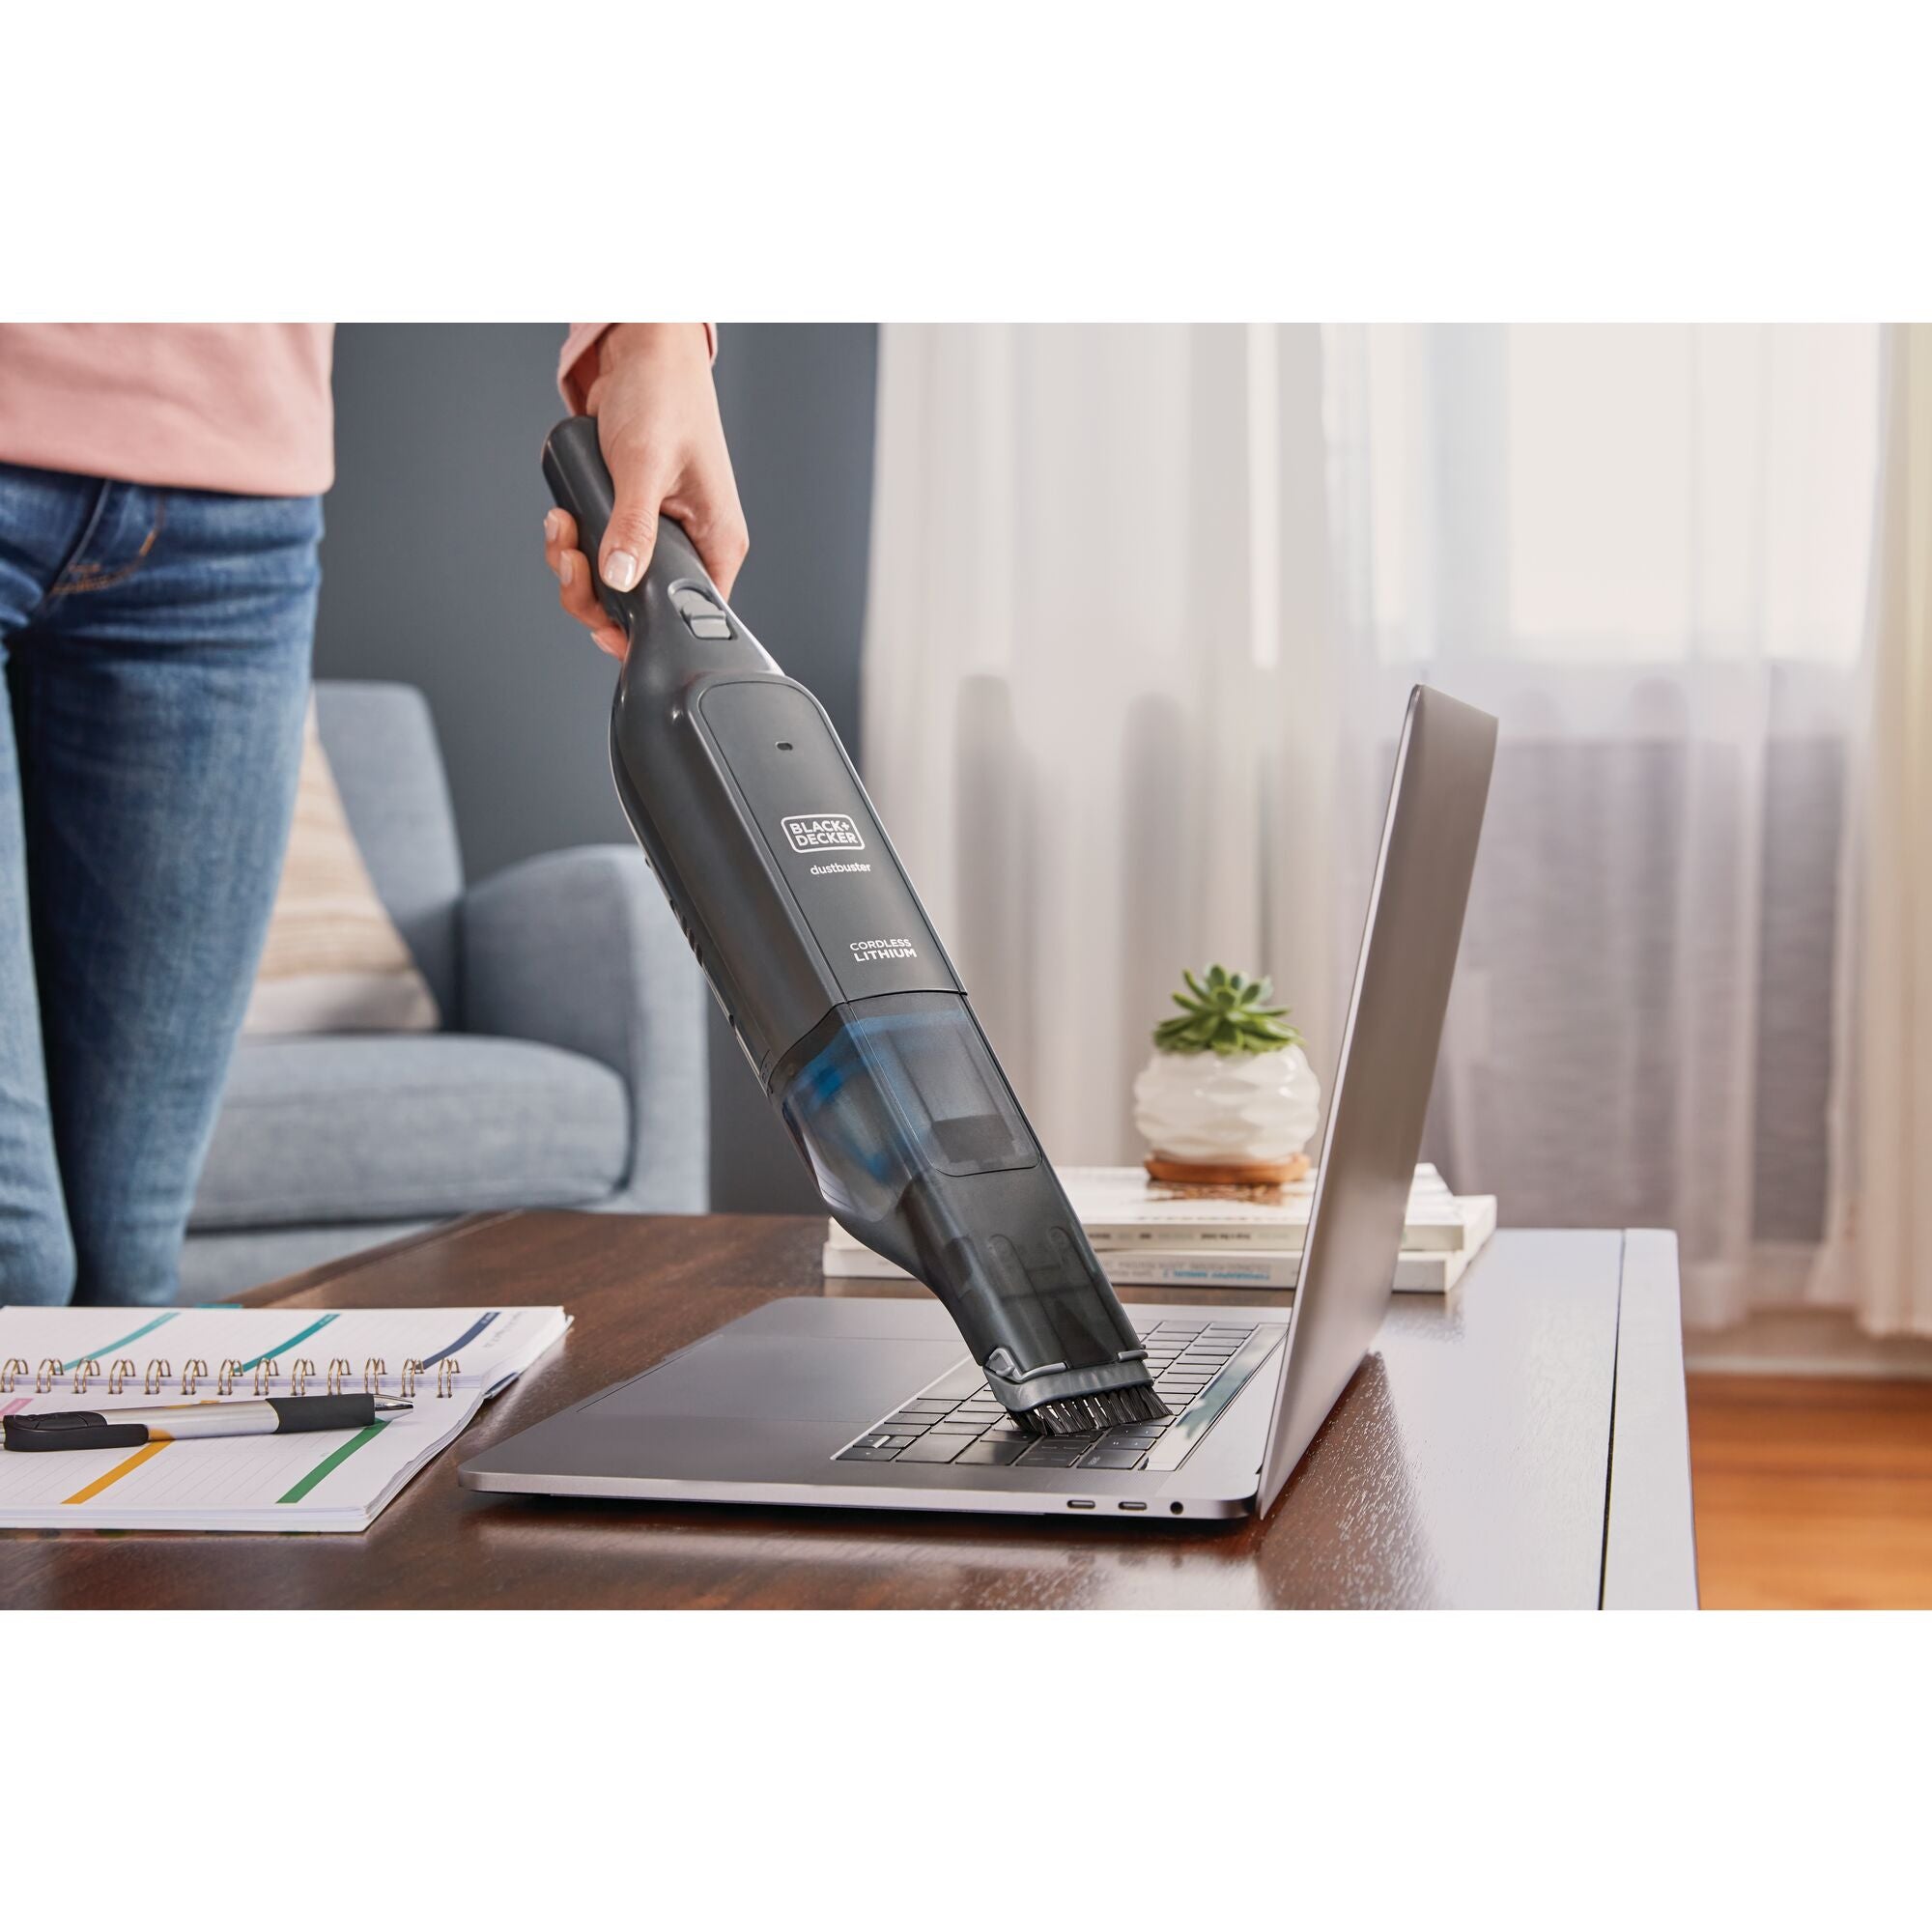 Dustbuster Cordless Hand Vacuum Advancedclean Slim With Charger